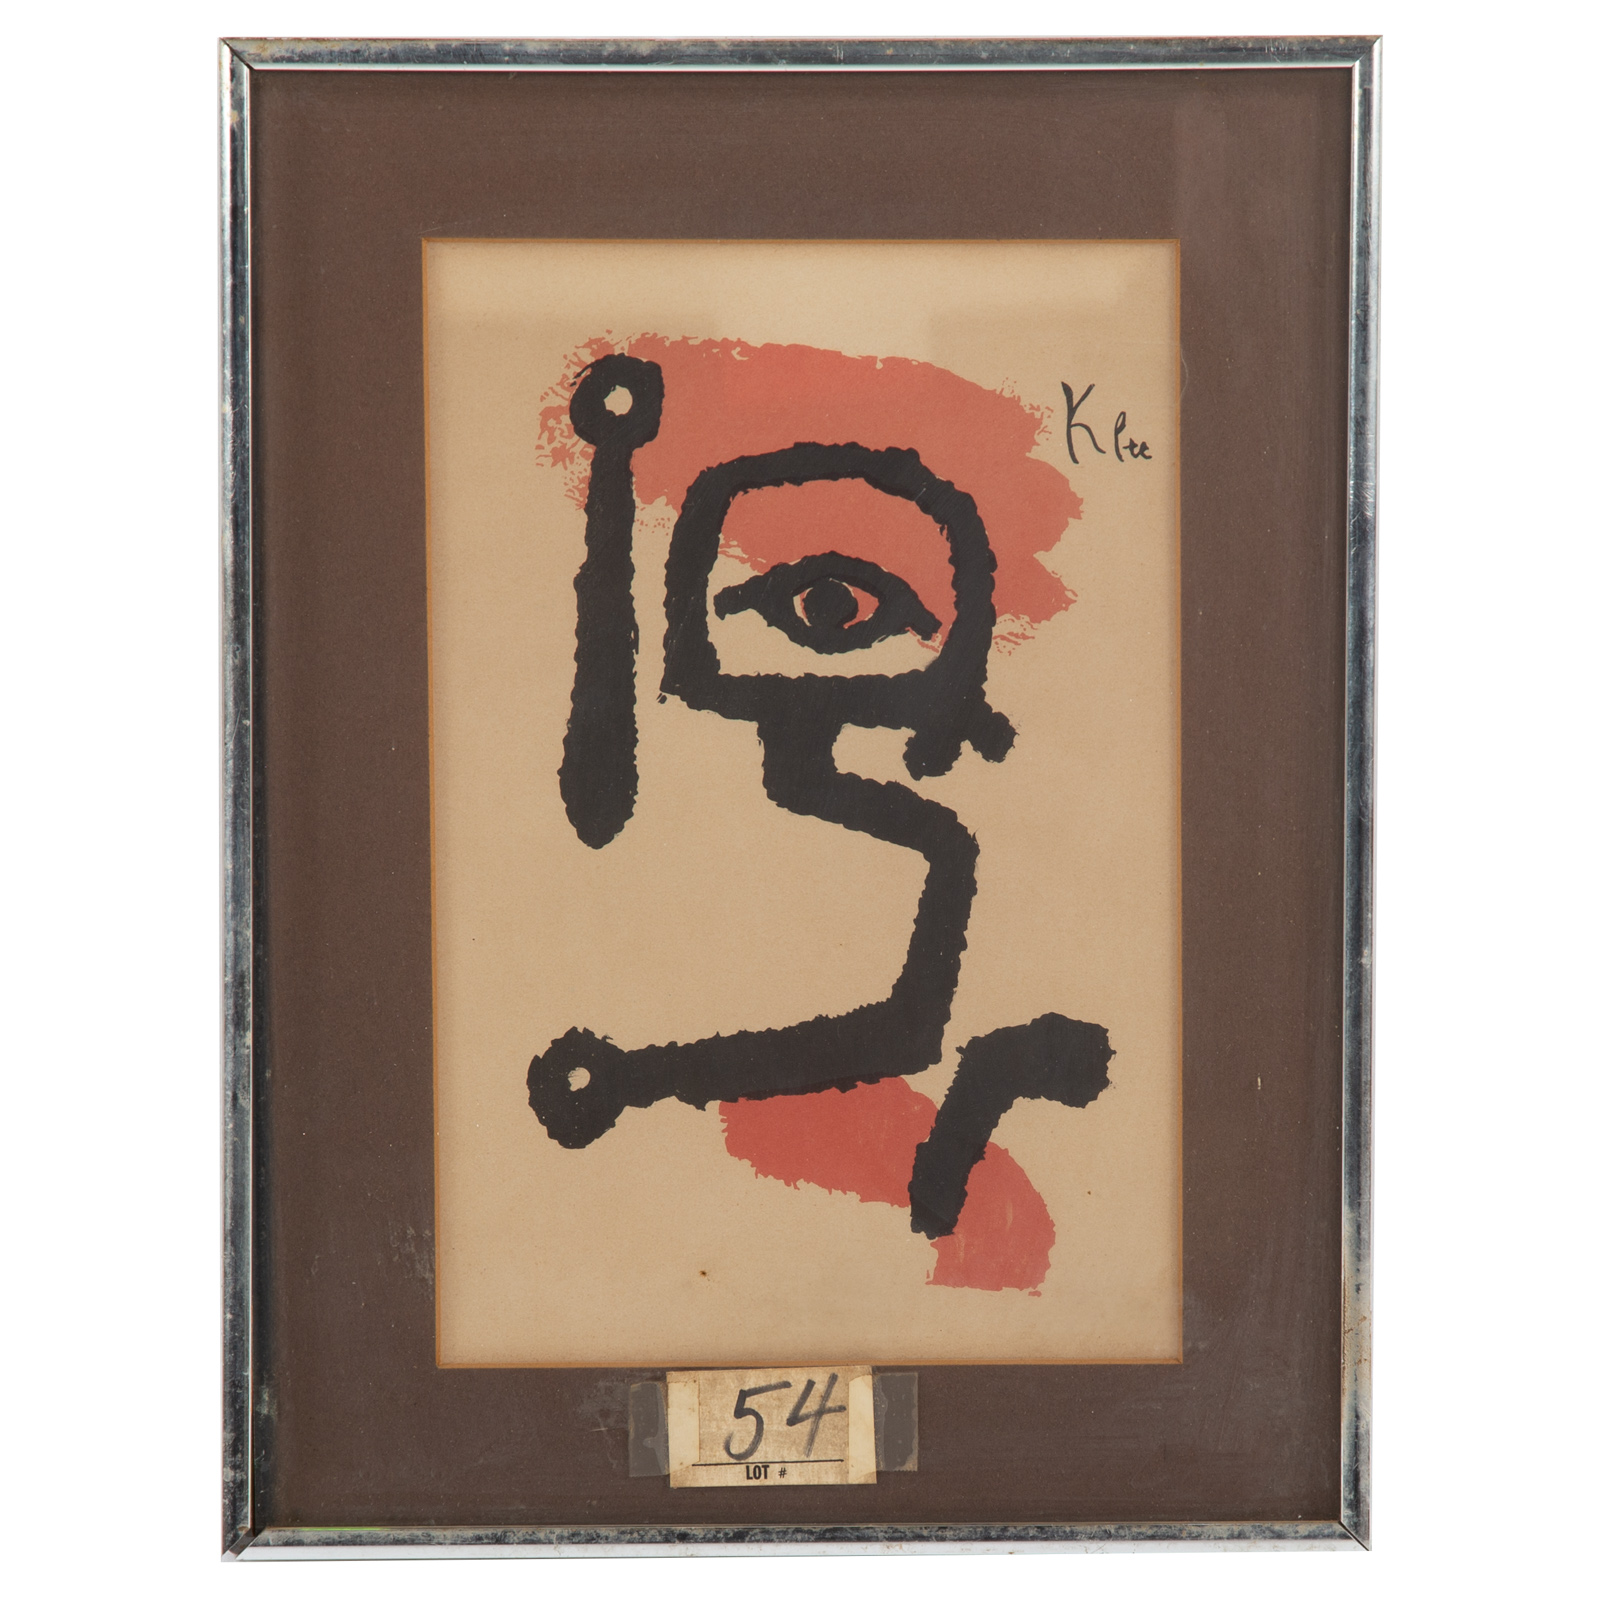 AFTER PAUL KLEE. THE DRUMMER, LITHOGRAPH